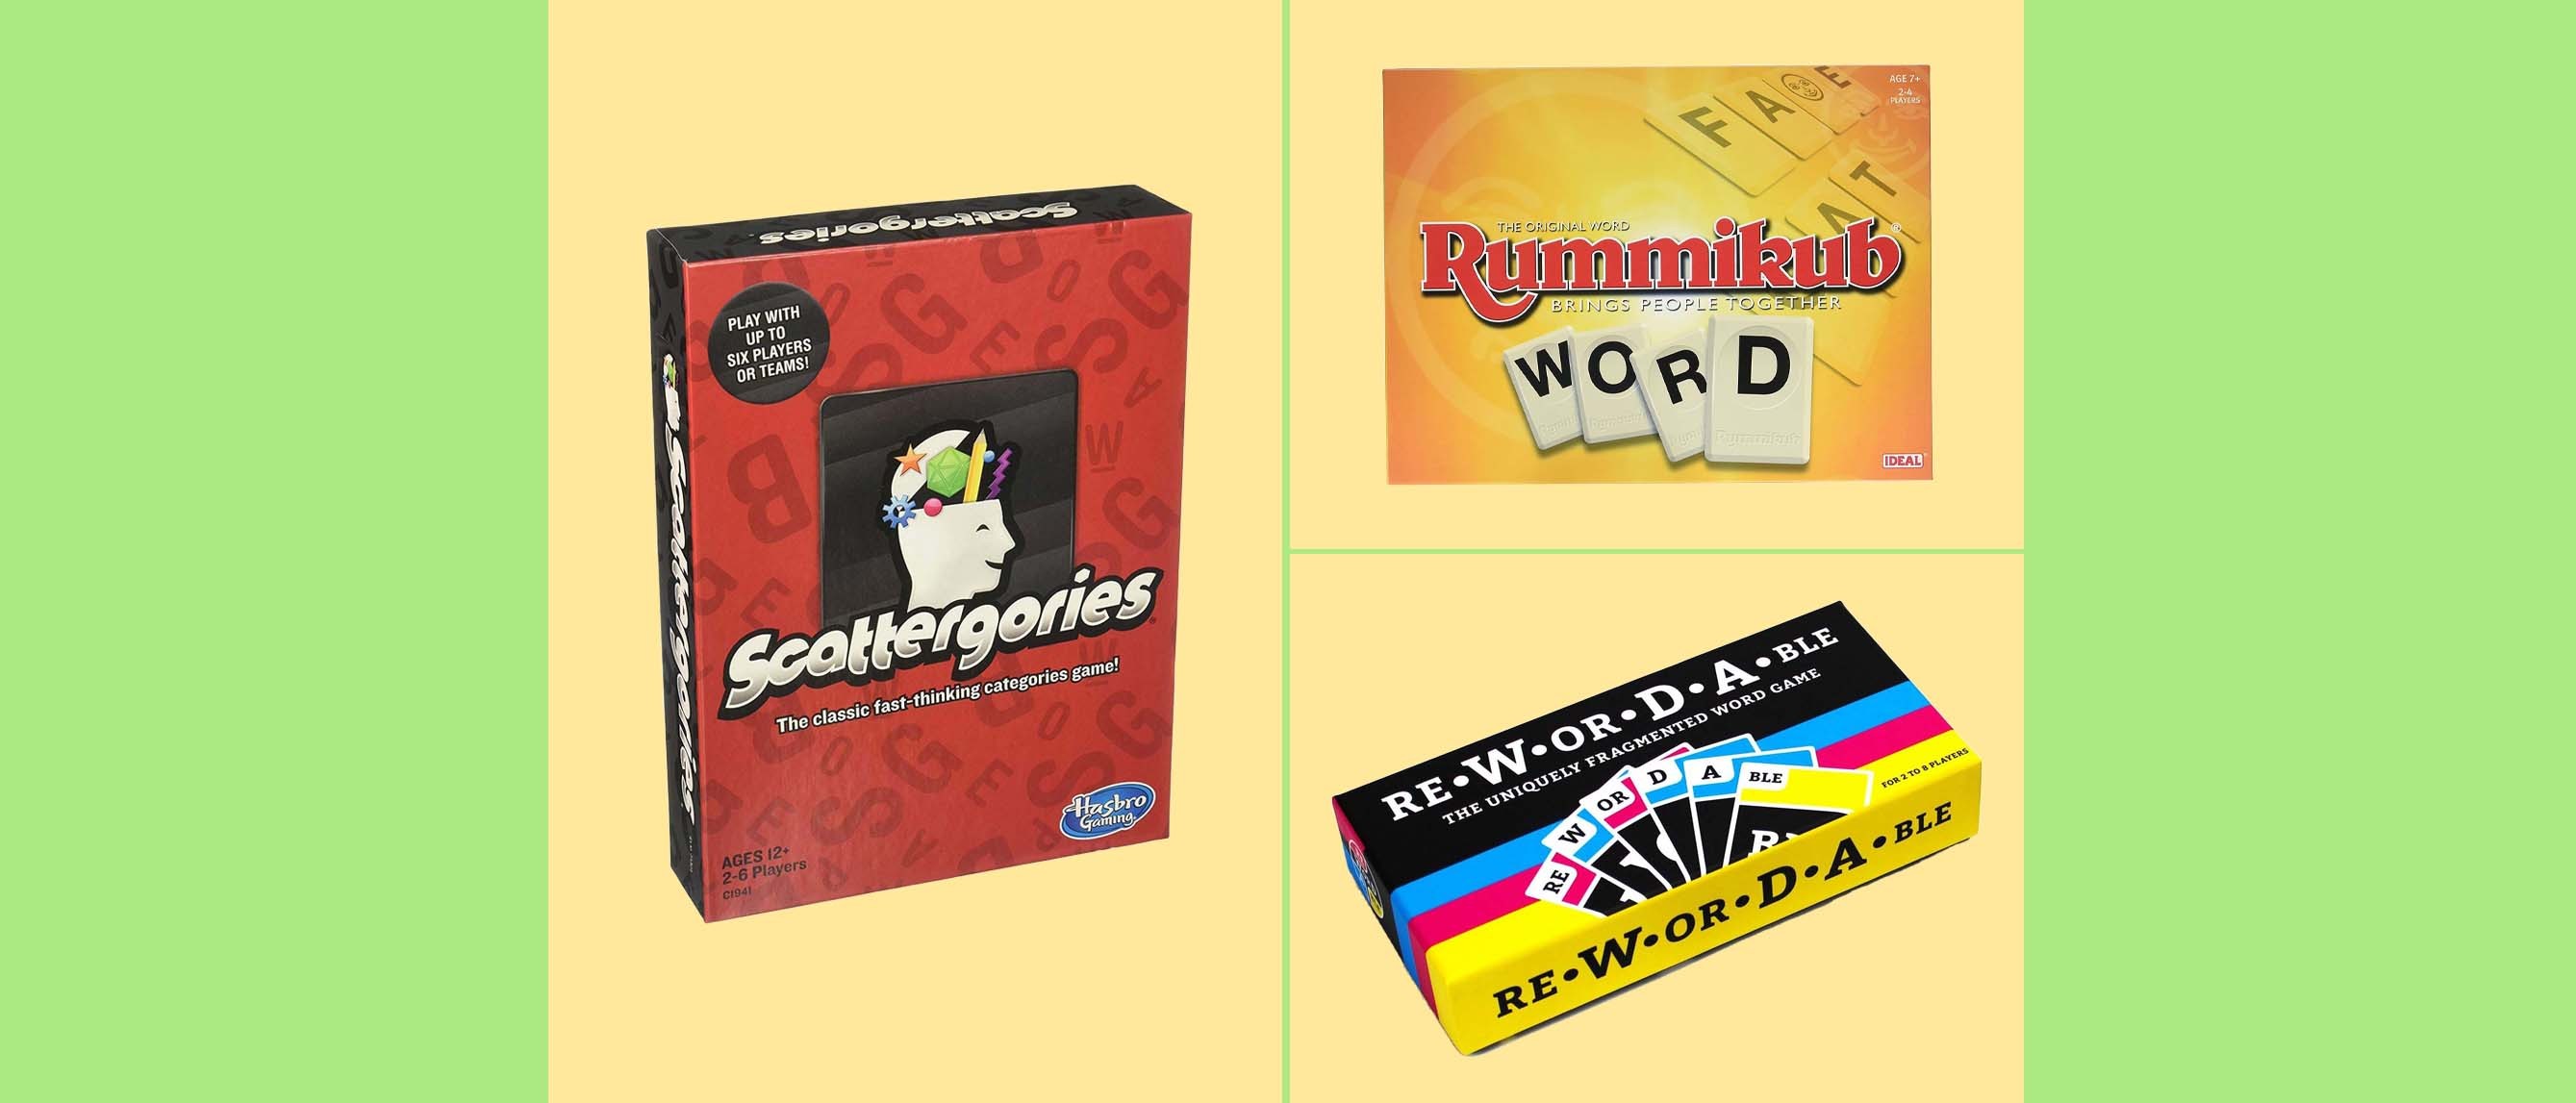 From Wordle to Scrabble: Do word games bring out the worst in